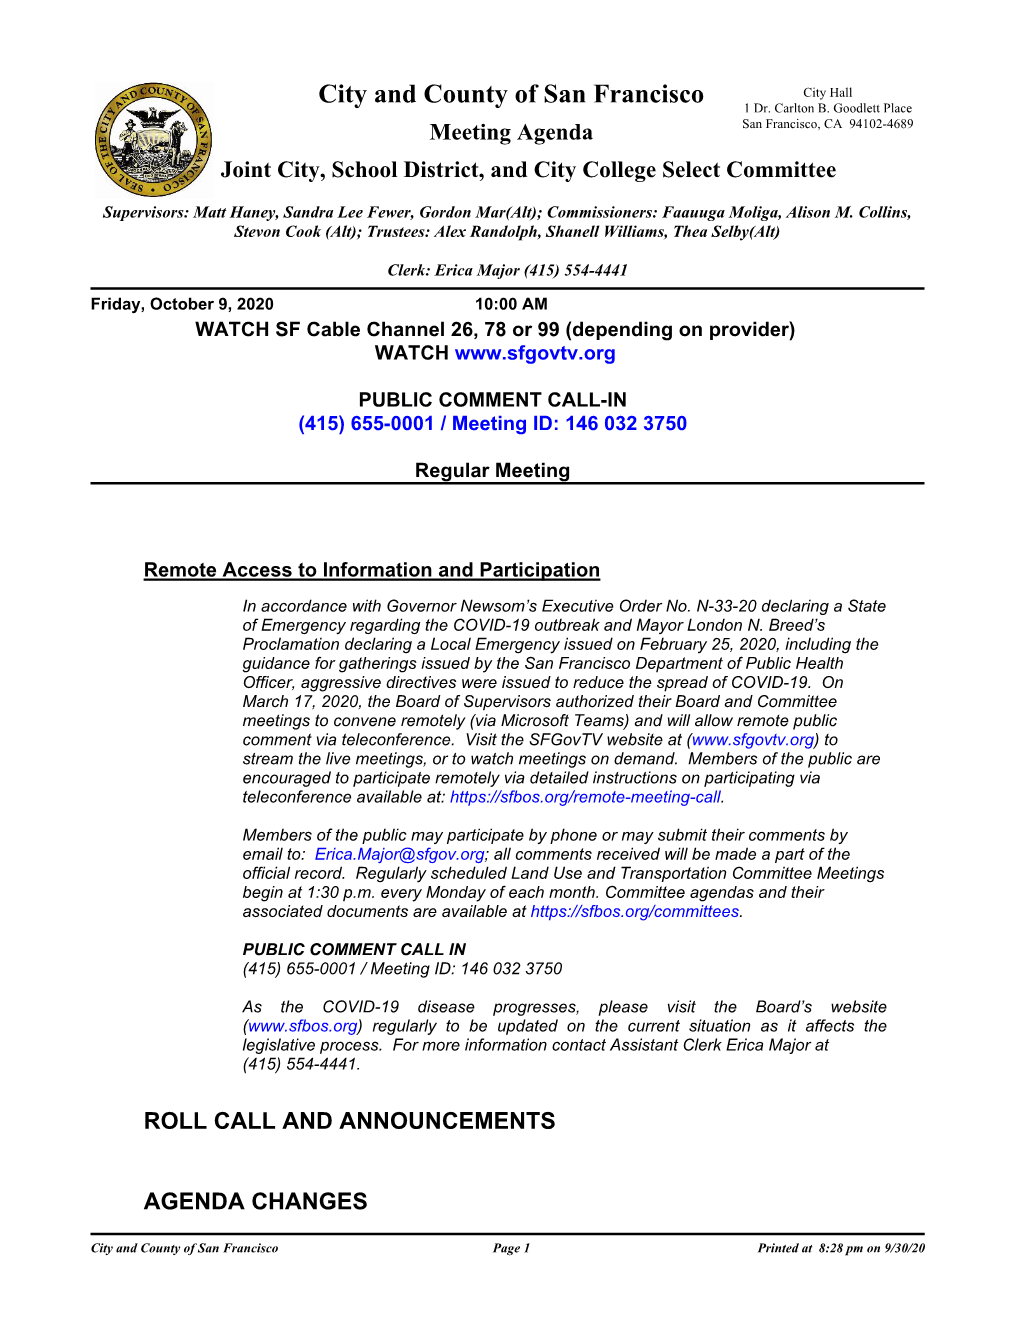 Meeting Agenda San Francisco, CA 94102-4689 Joint City, School District, and City College Select Committee